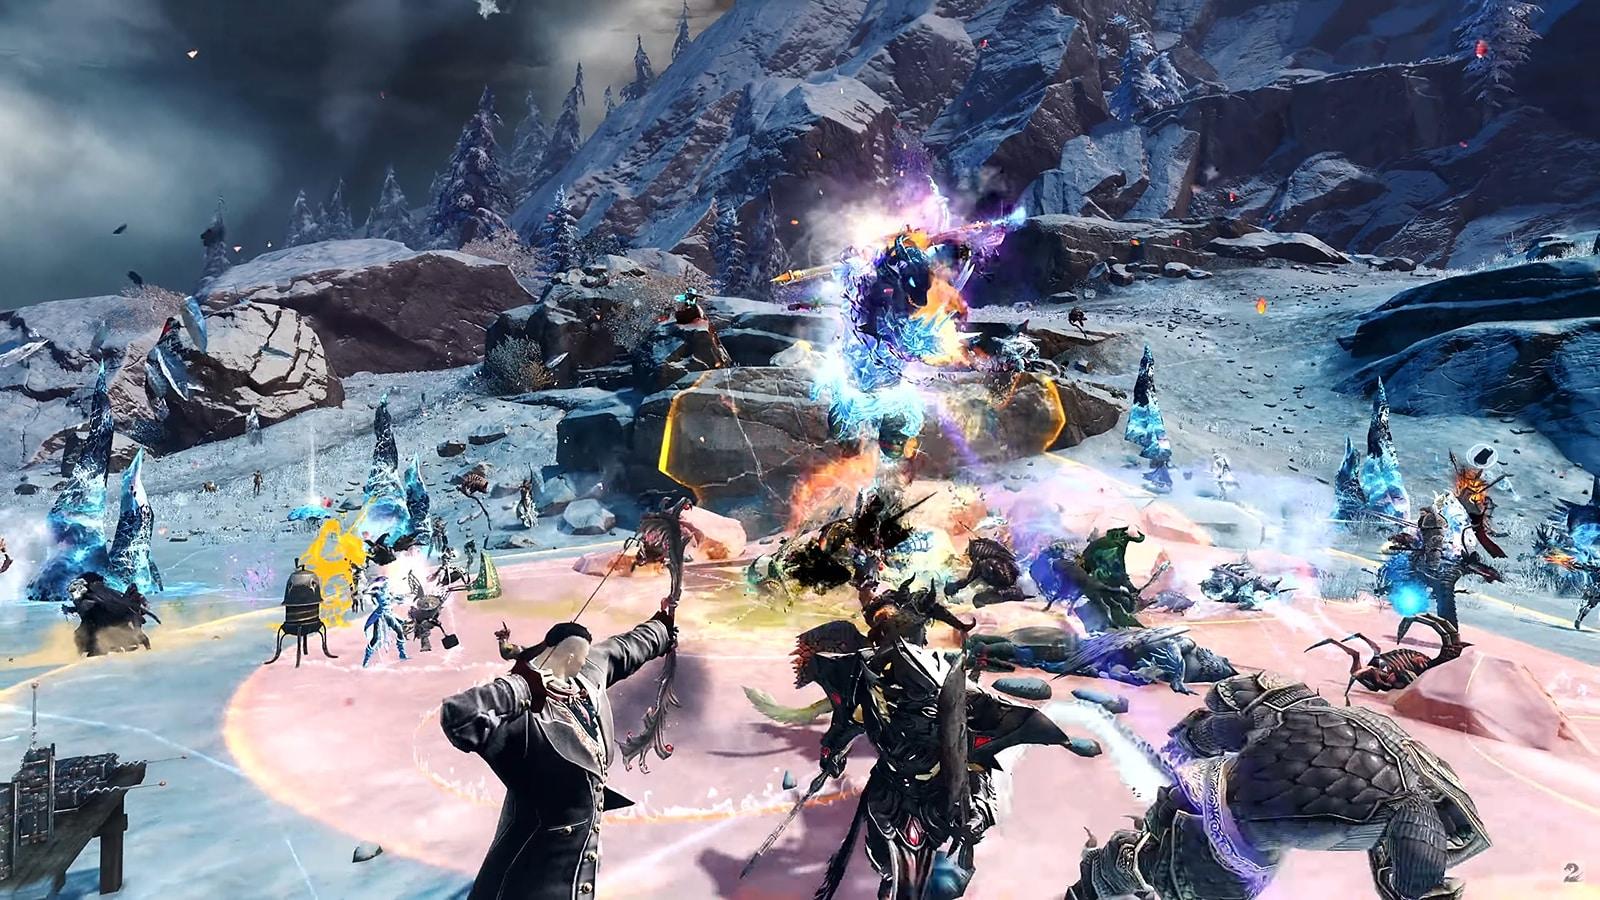 A large group of players fighting an enemy in the Guild Wars 2 MMO